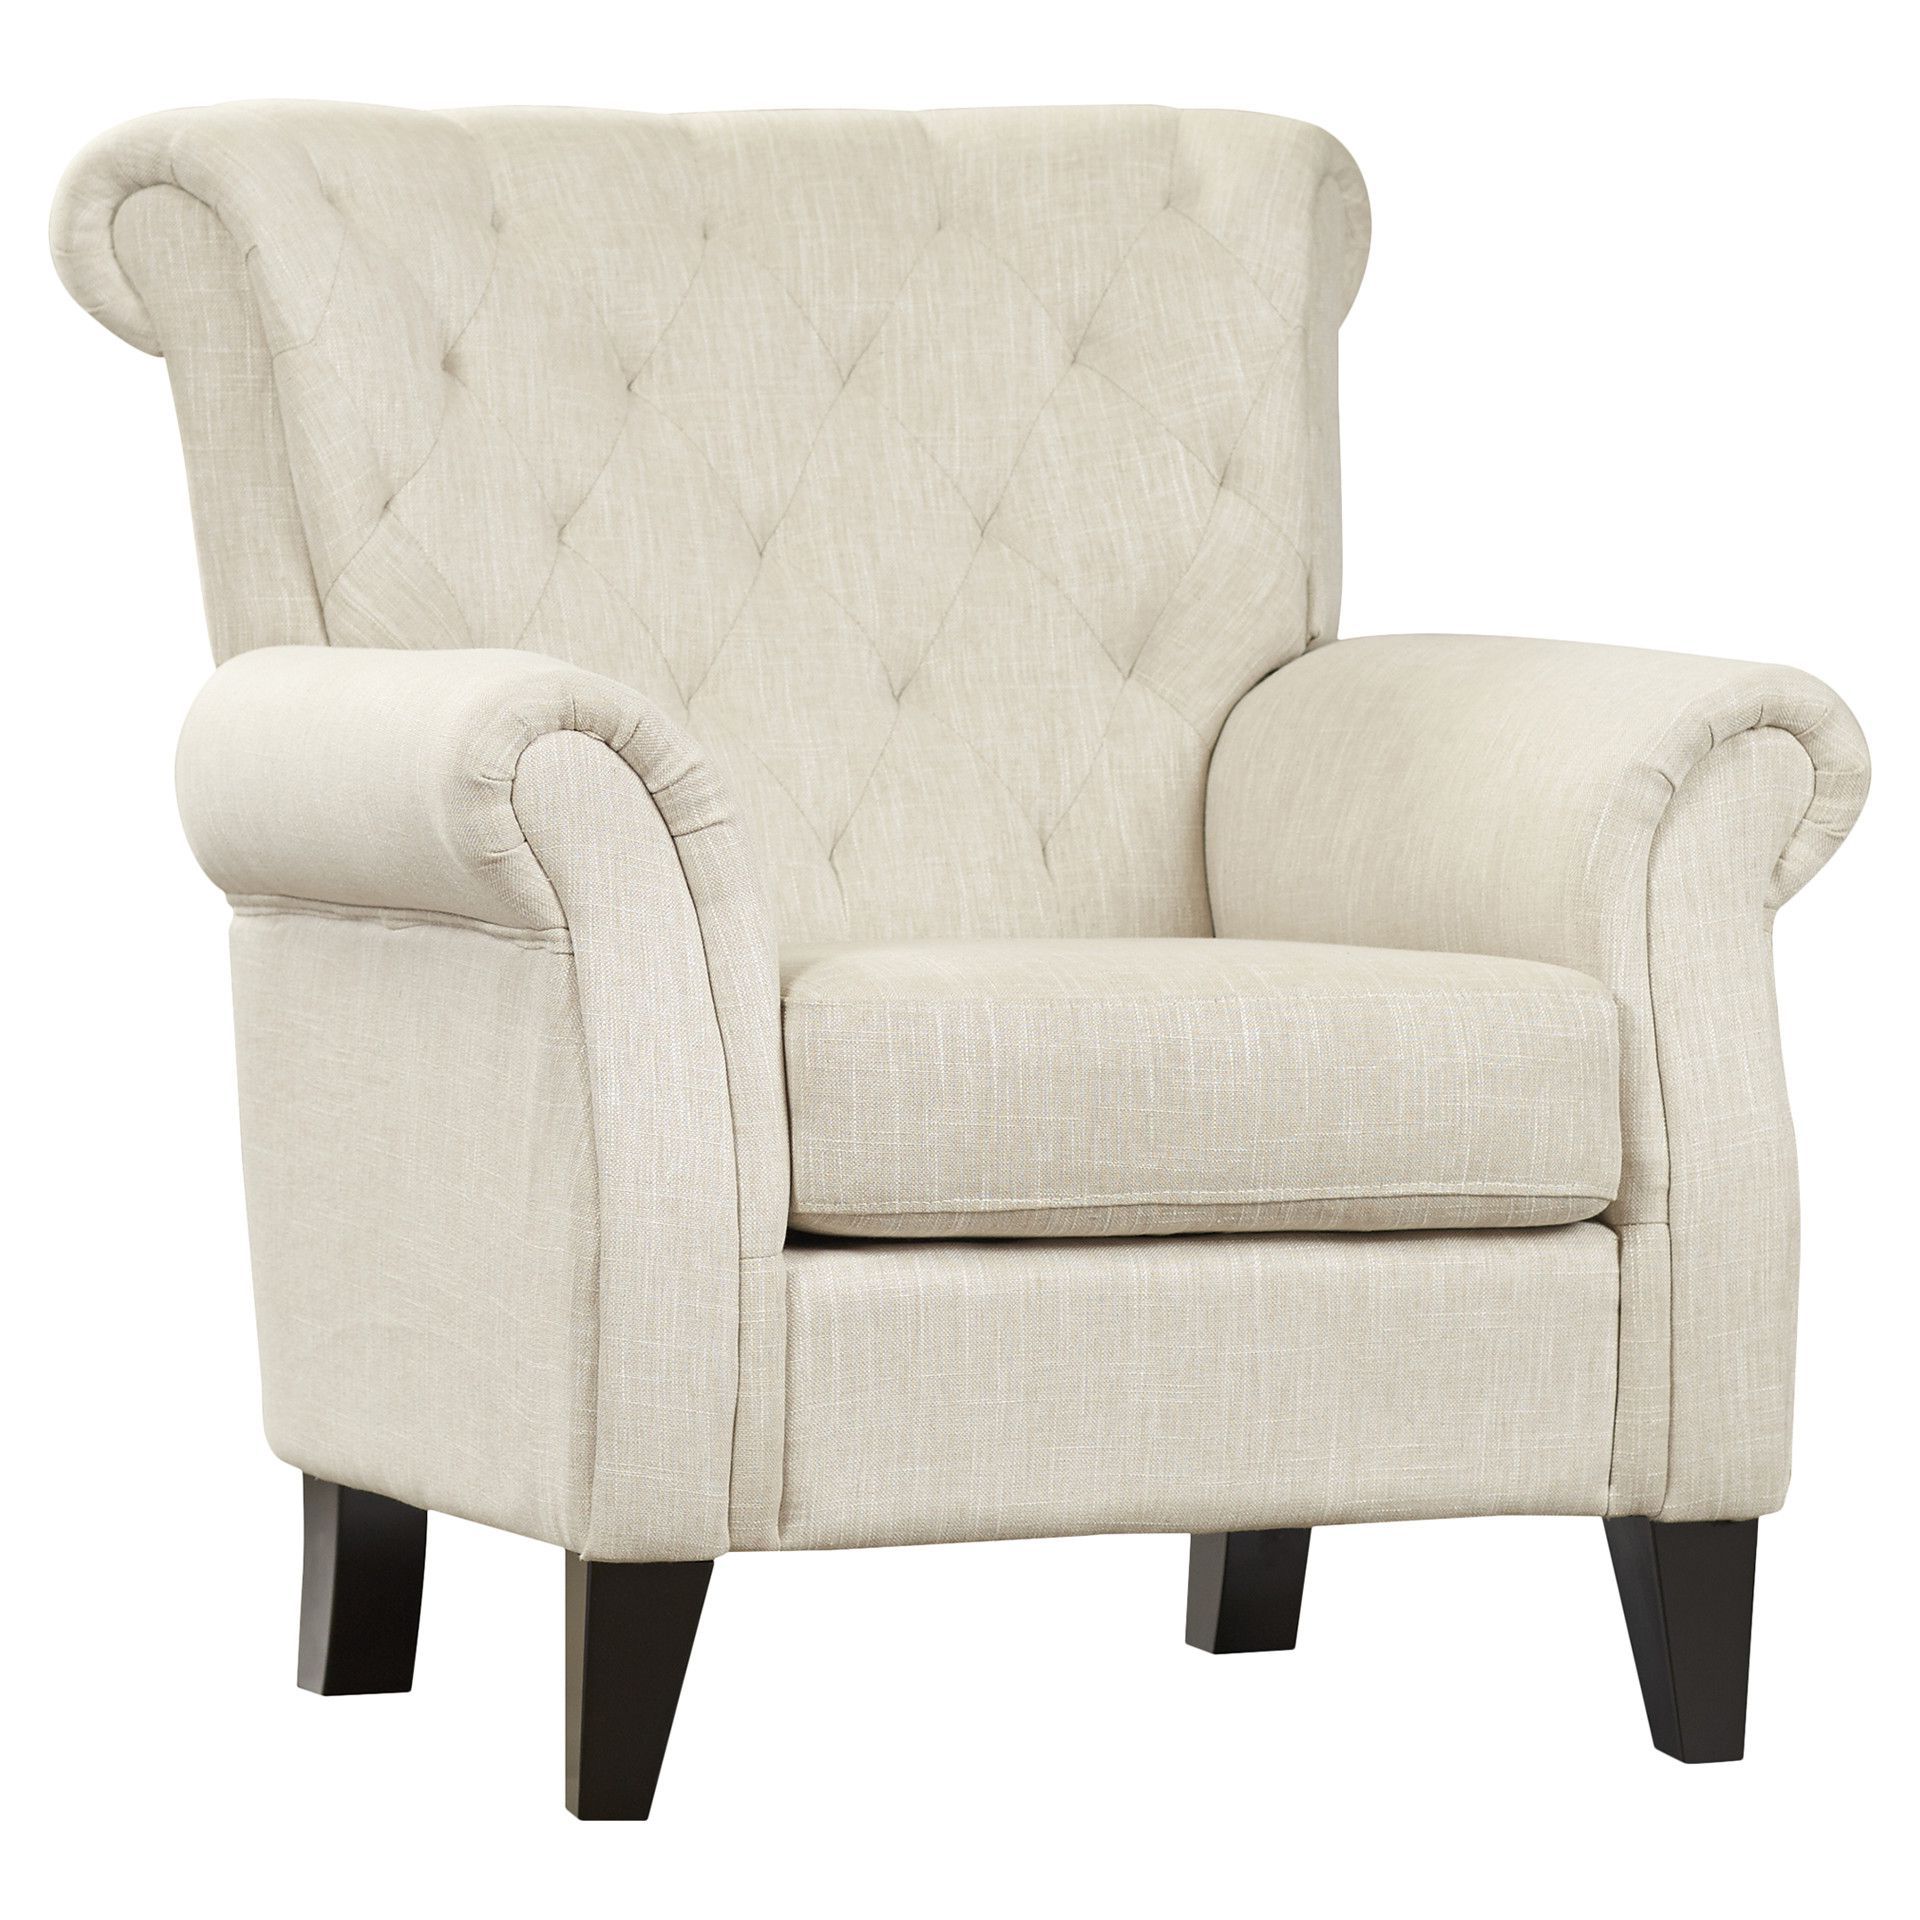 Tufted Accent Chair, Furniture Regarding Louisburg Armchairs (View 6 of 20)